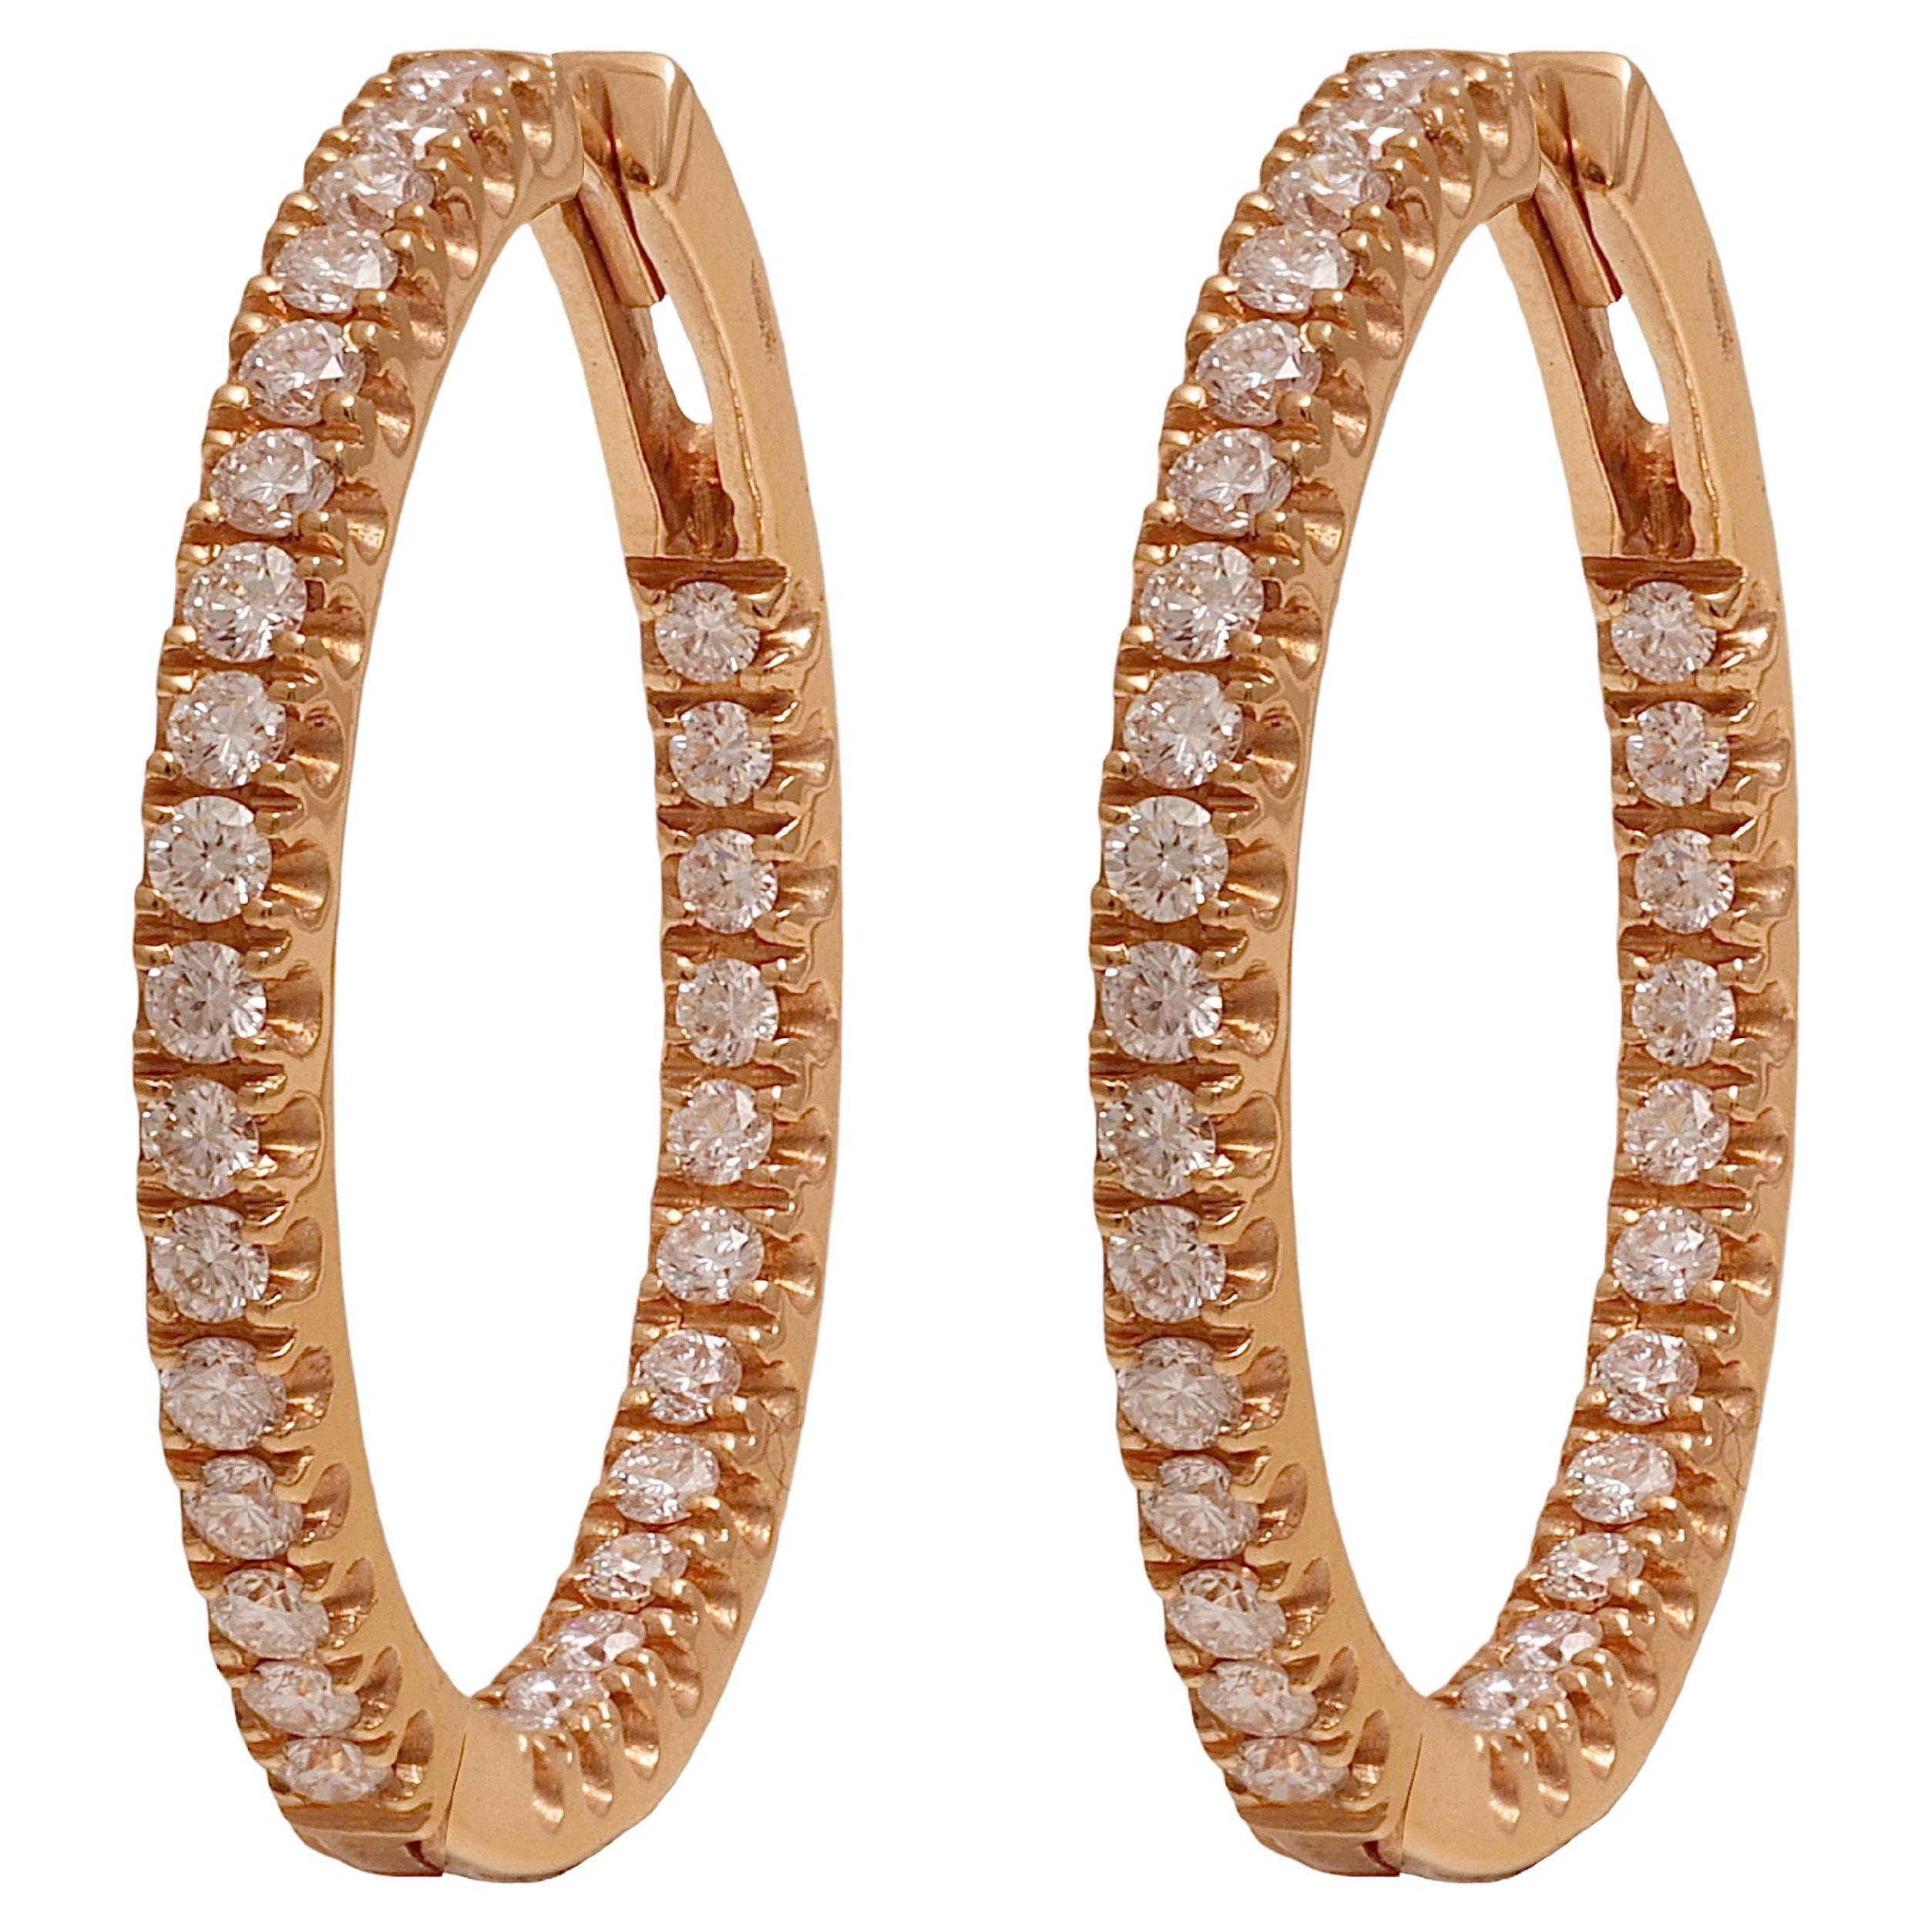 Gorgeous Loop Earrings in 18 kt. Yellow gold with 1.43 ct. Diamonds